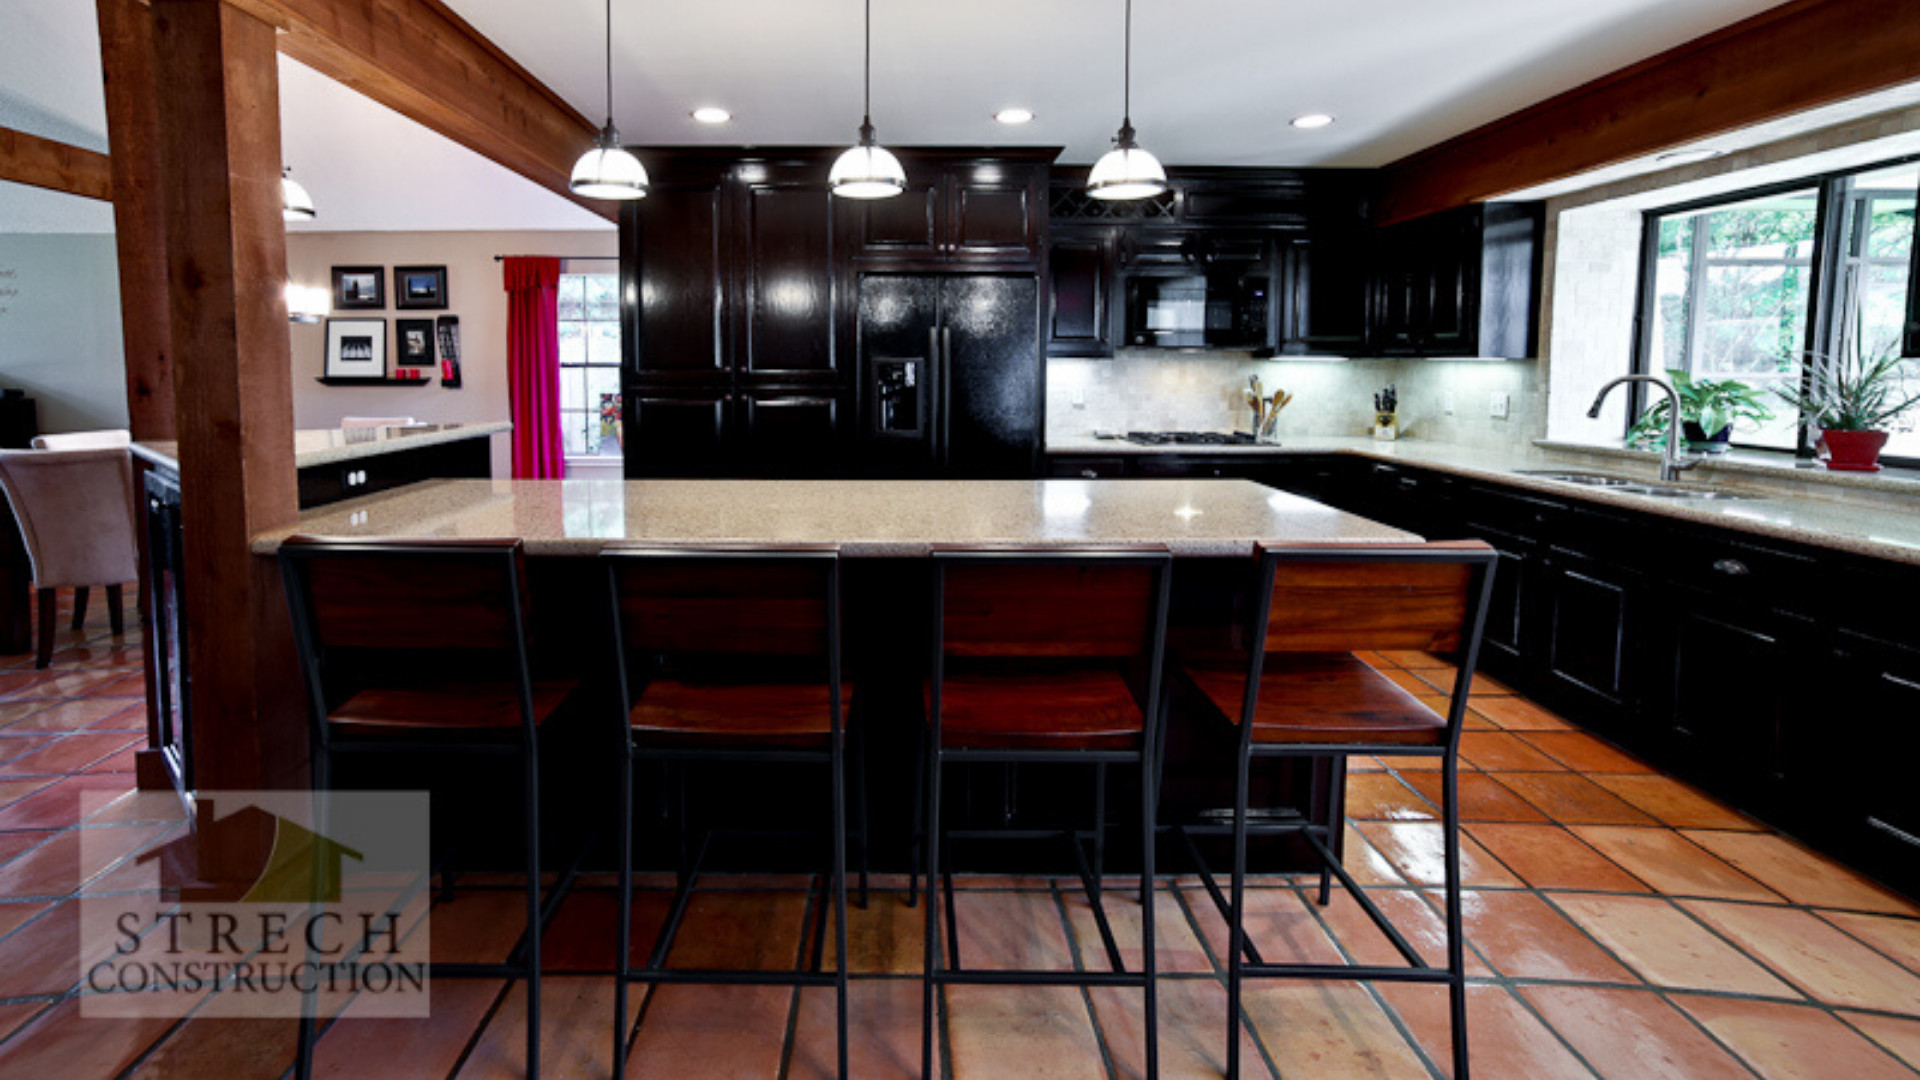 Kitchen Remodelers Houston Tx
 Kitchen Remodel Strech Construction Remodel and Custom